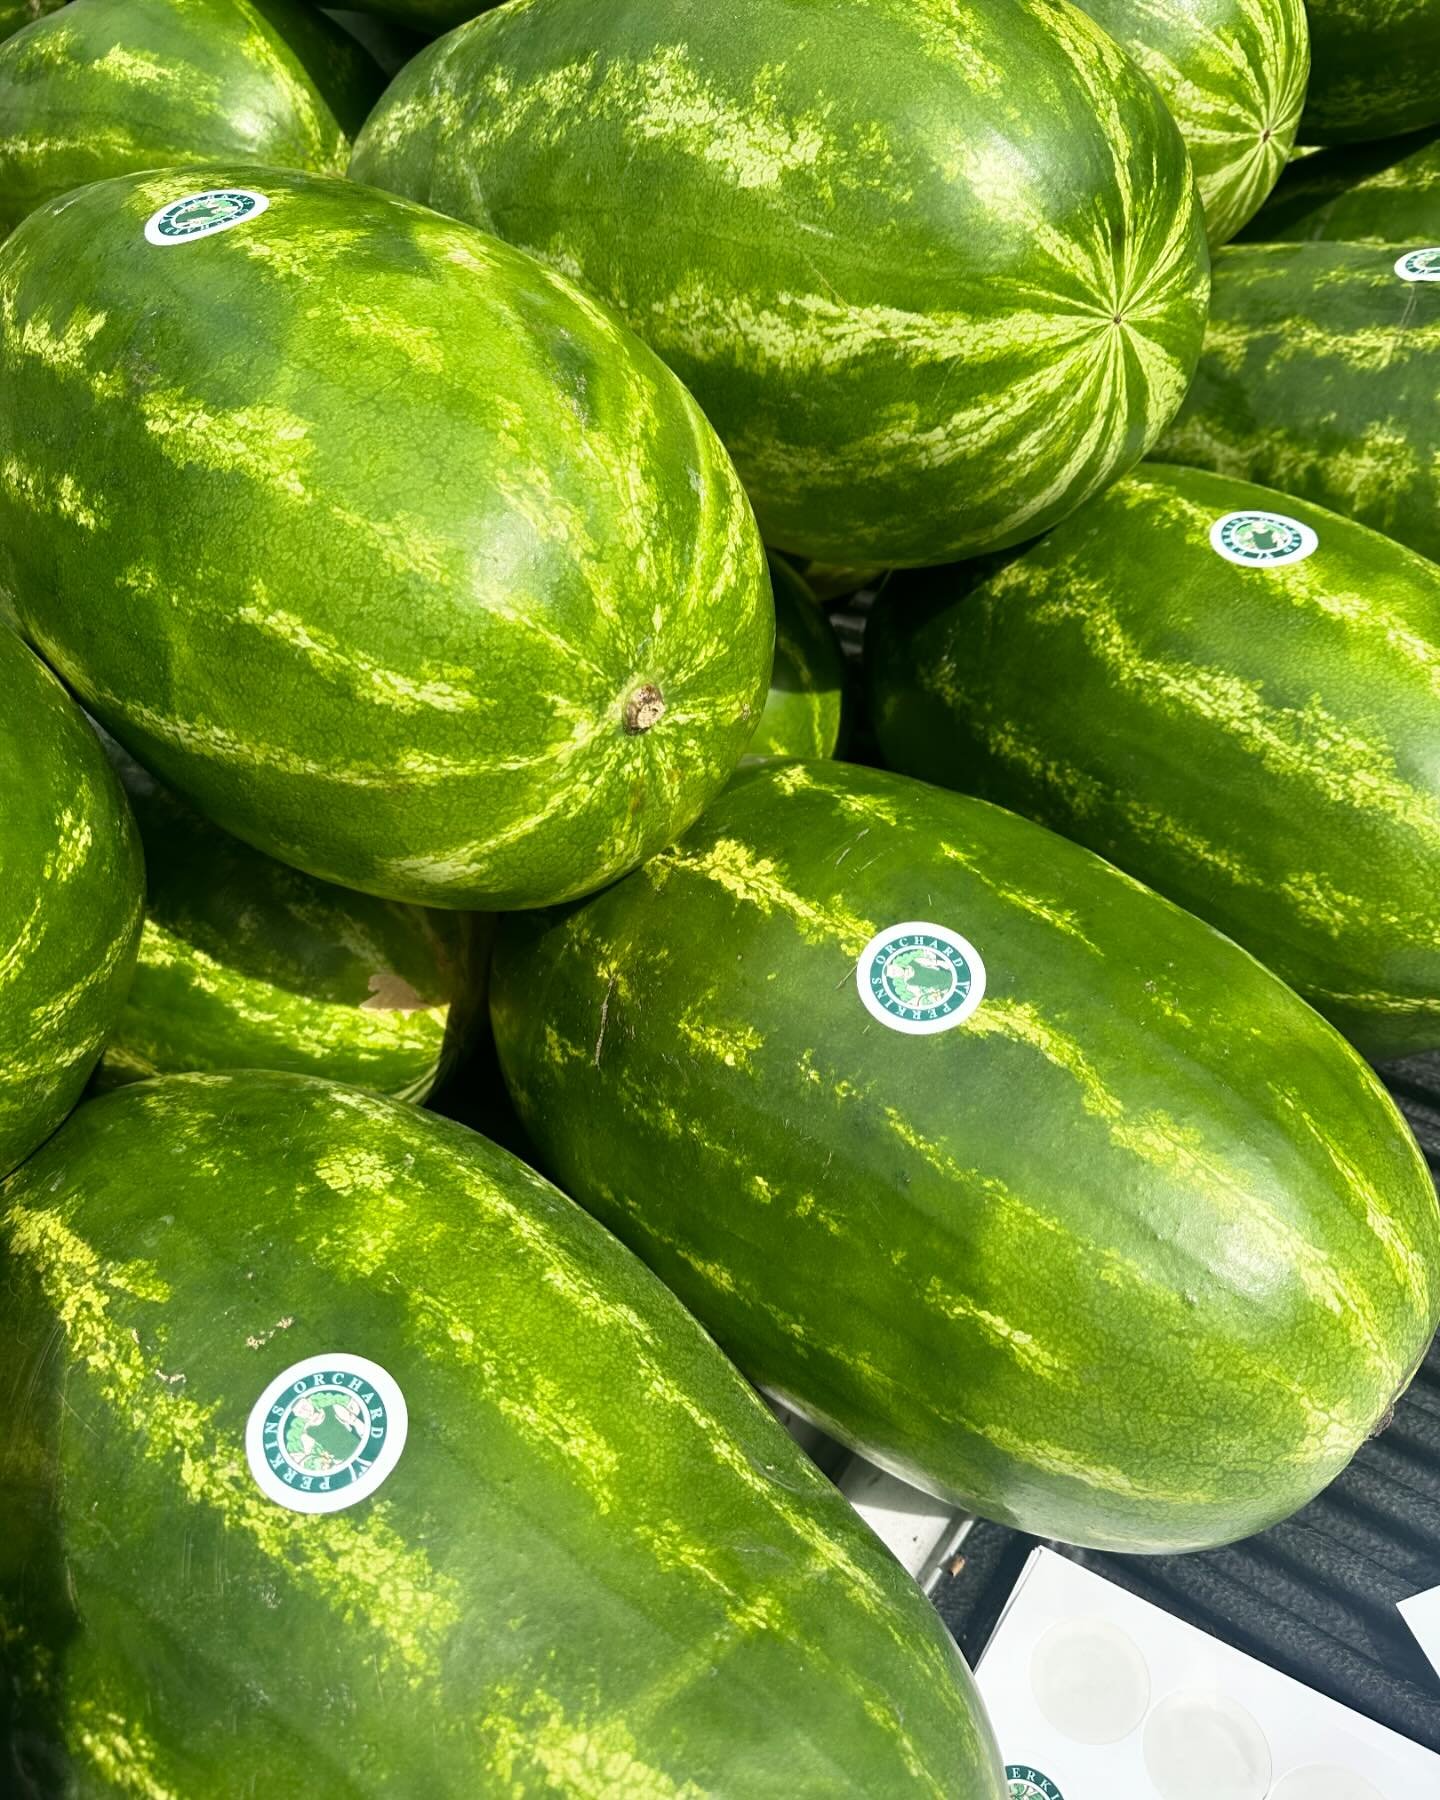 Best Watermelons in Town! 🍉 
Give mom more than a kiss, show her some real sugar 😉